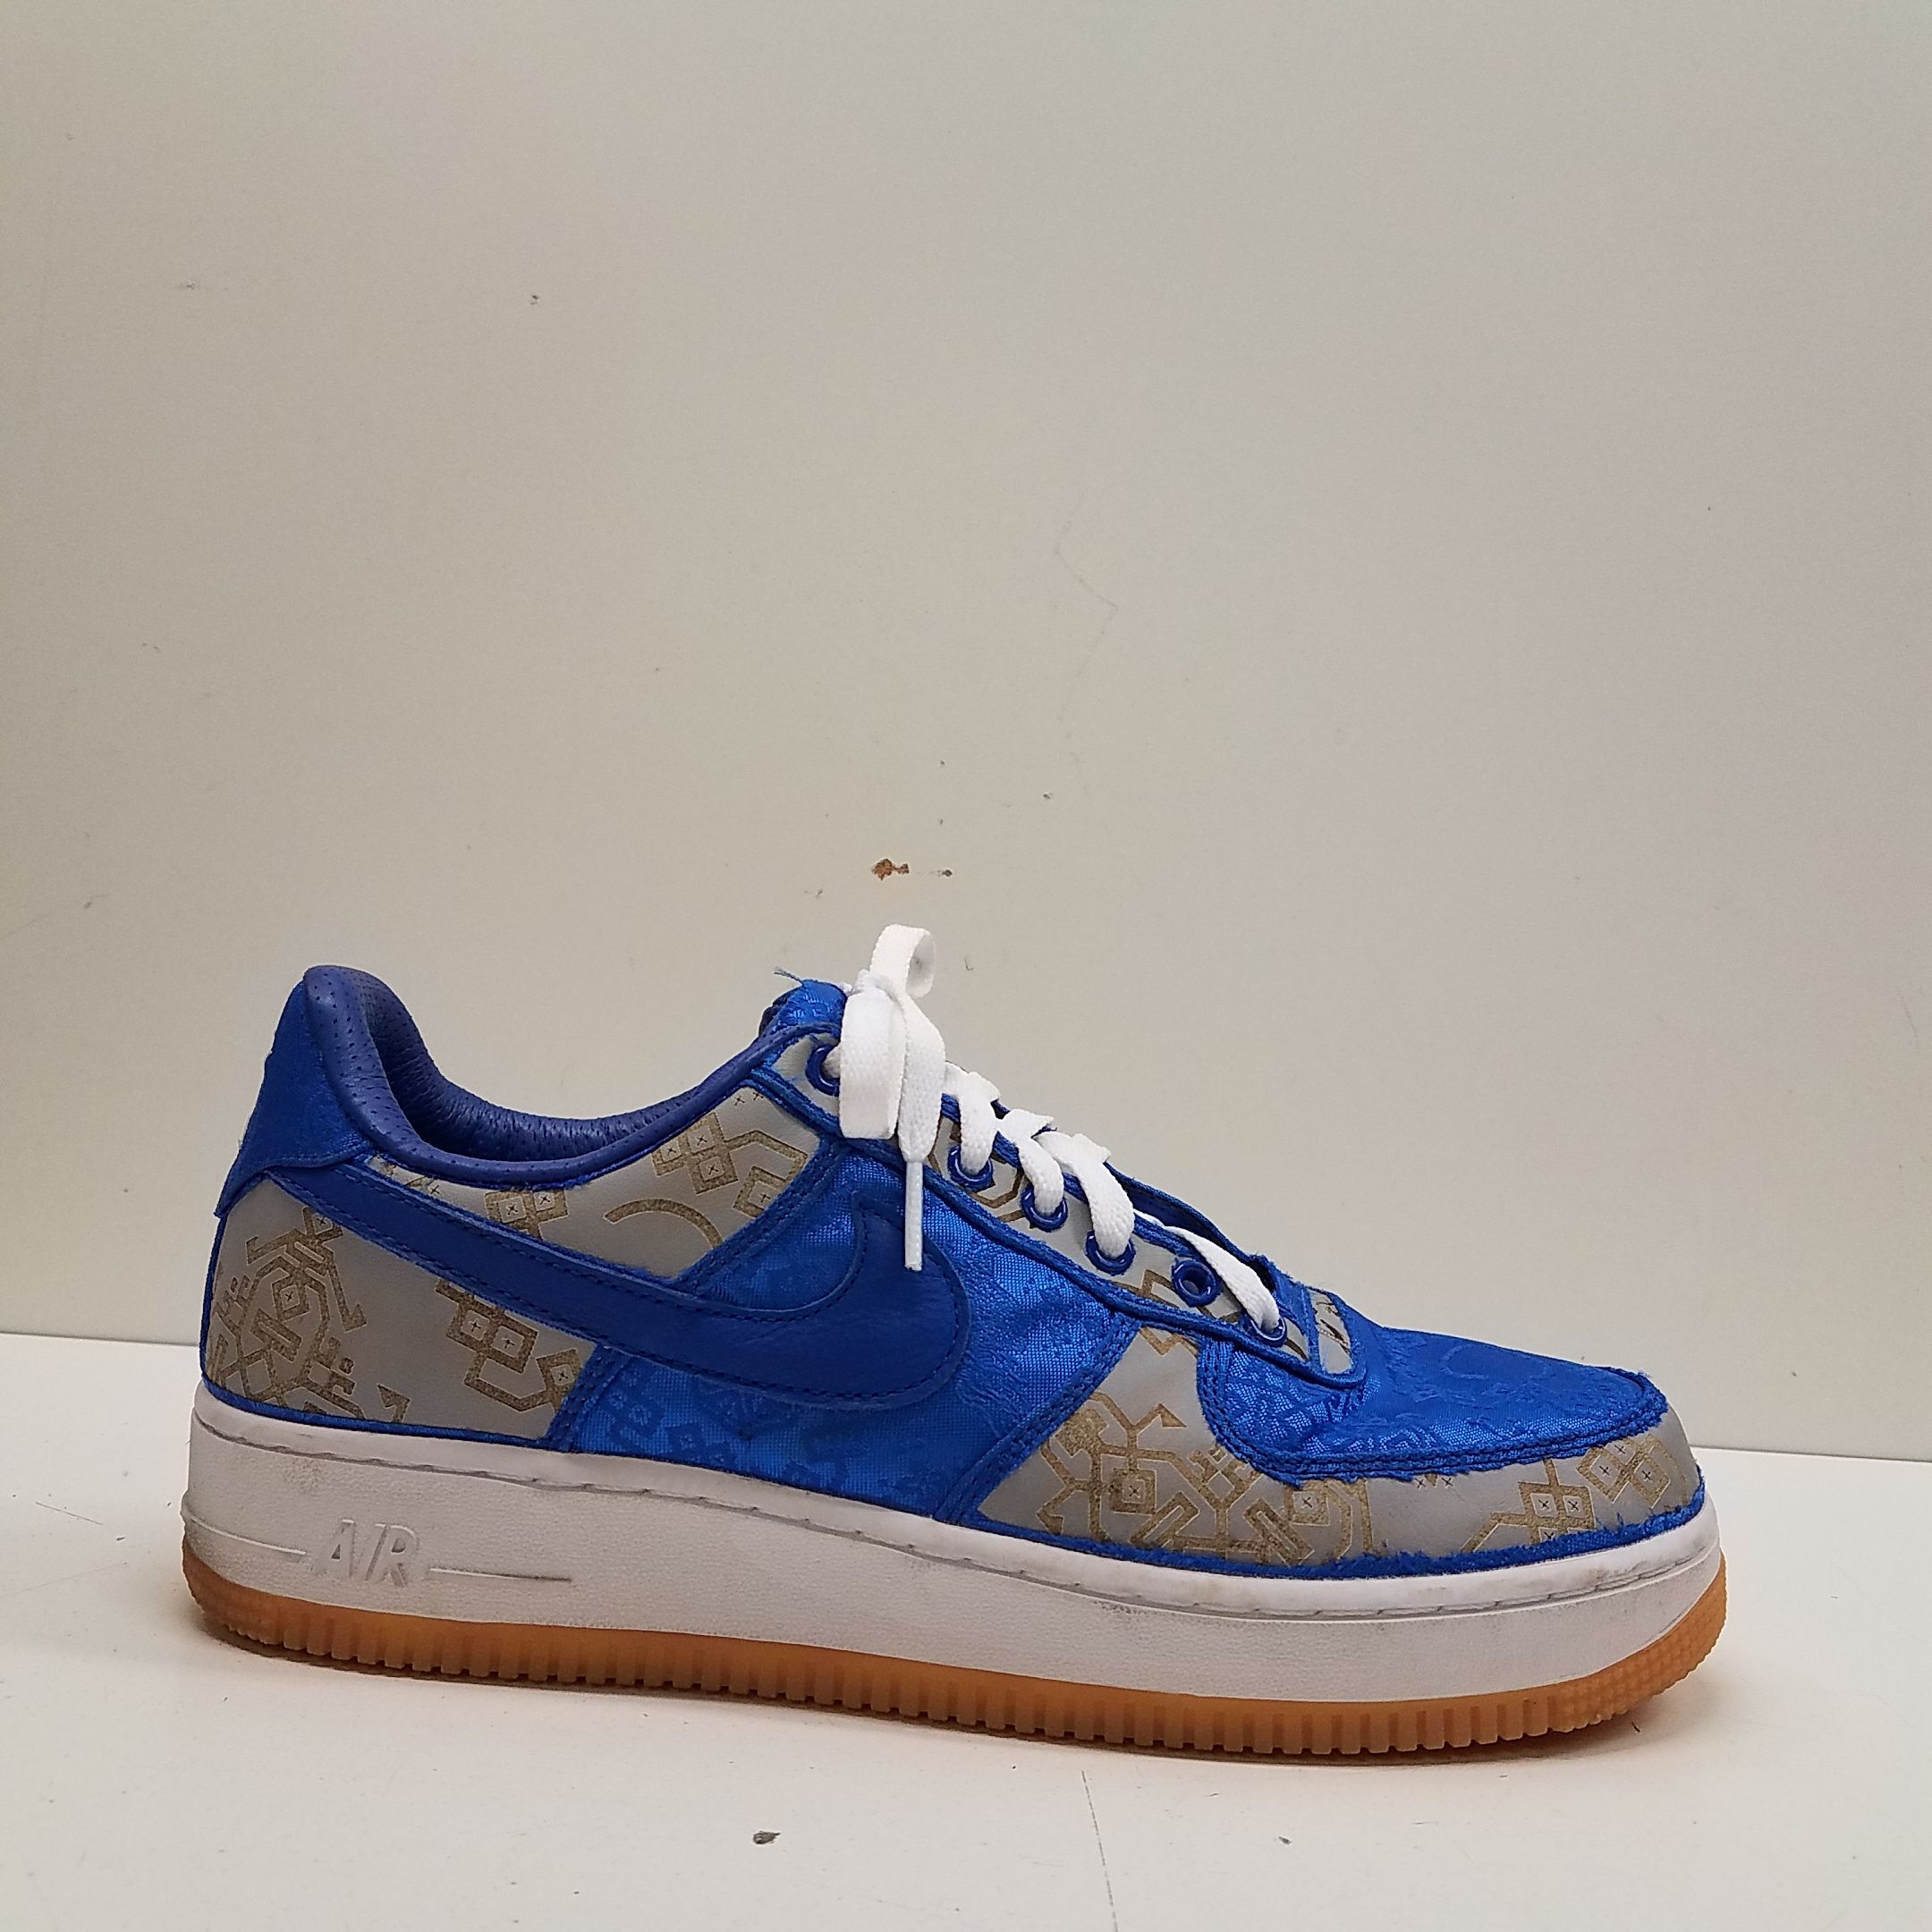 Buy the Nike Air Force 1 Clot CJ5290-400 Blue Men's Size 10.5 |  GoodwillFinds